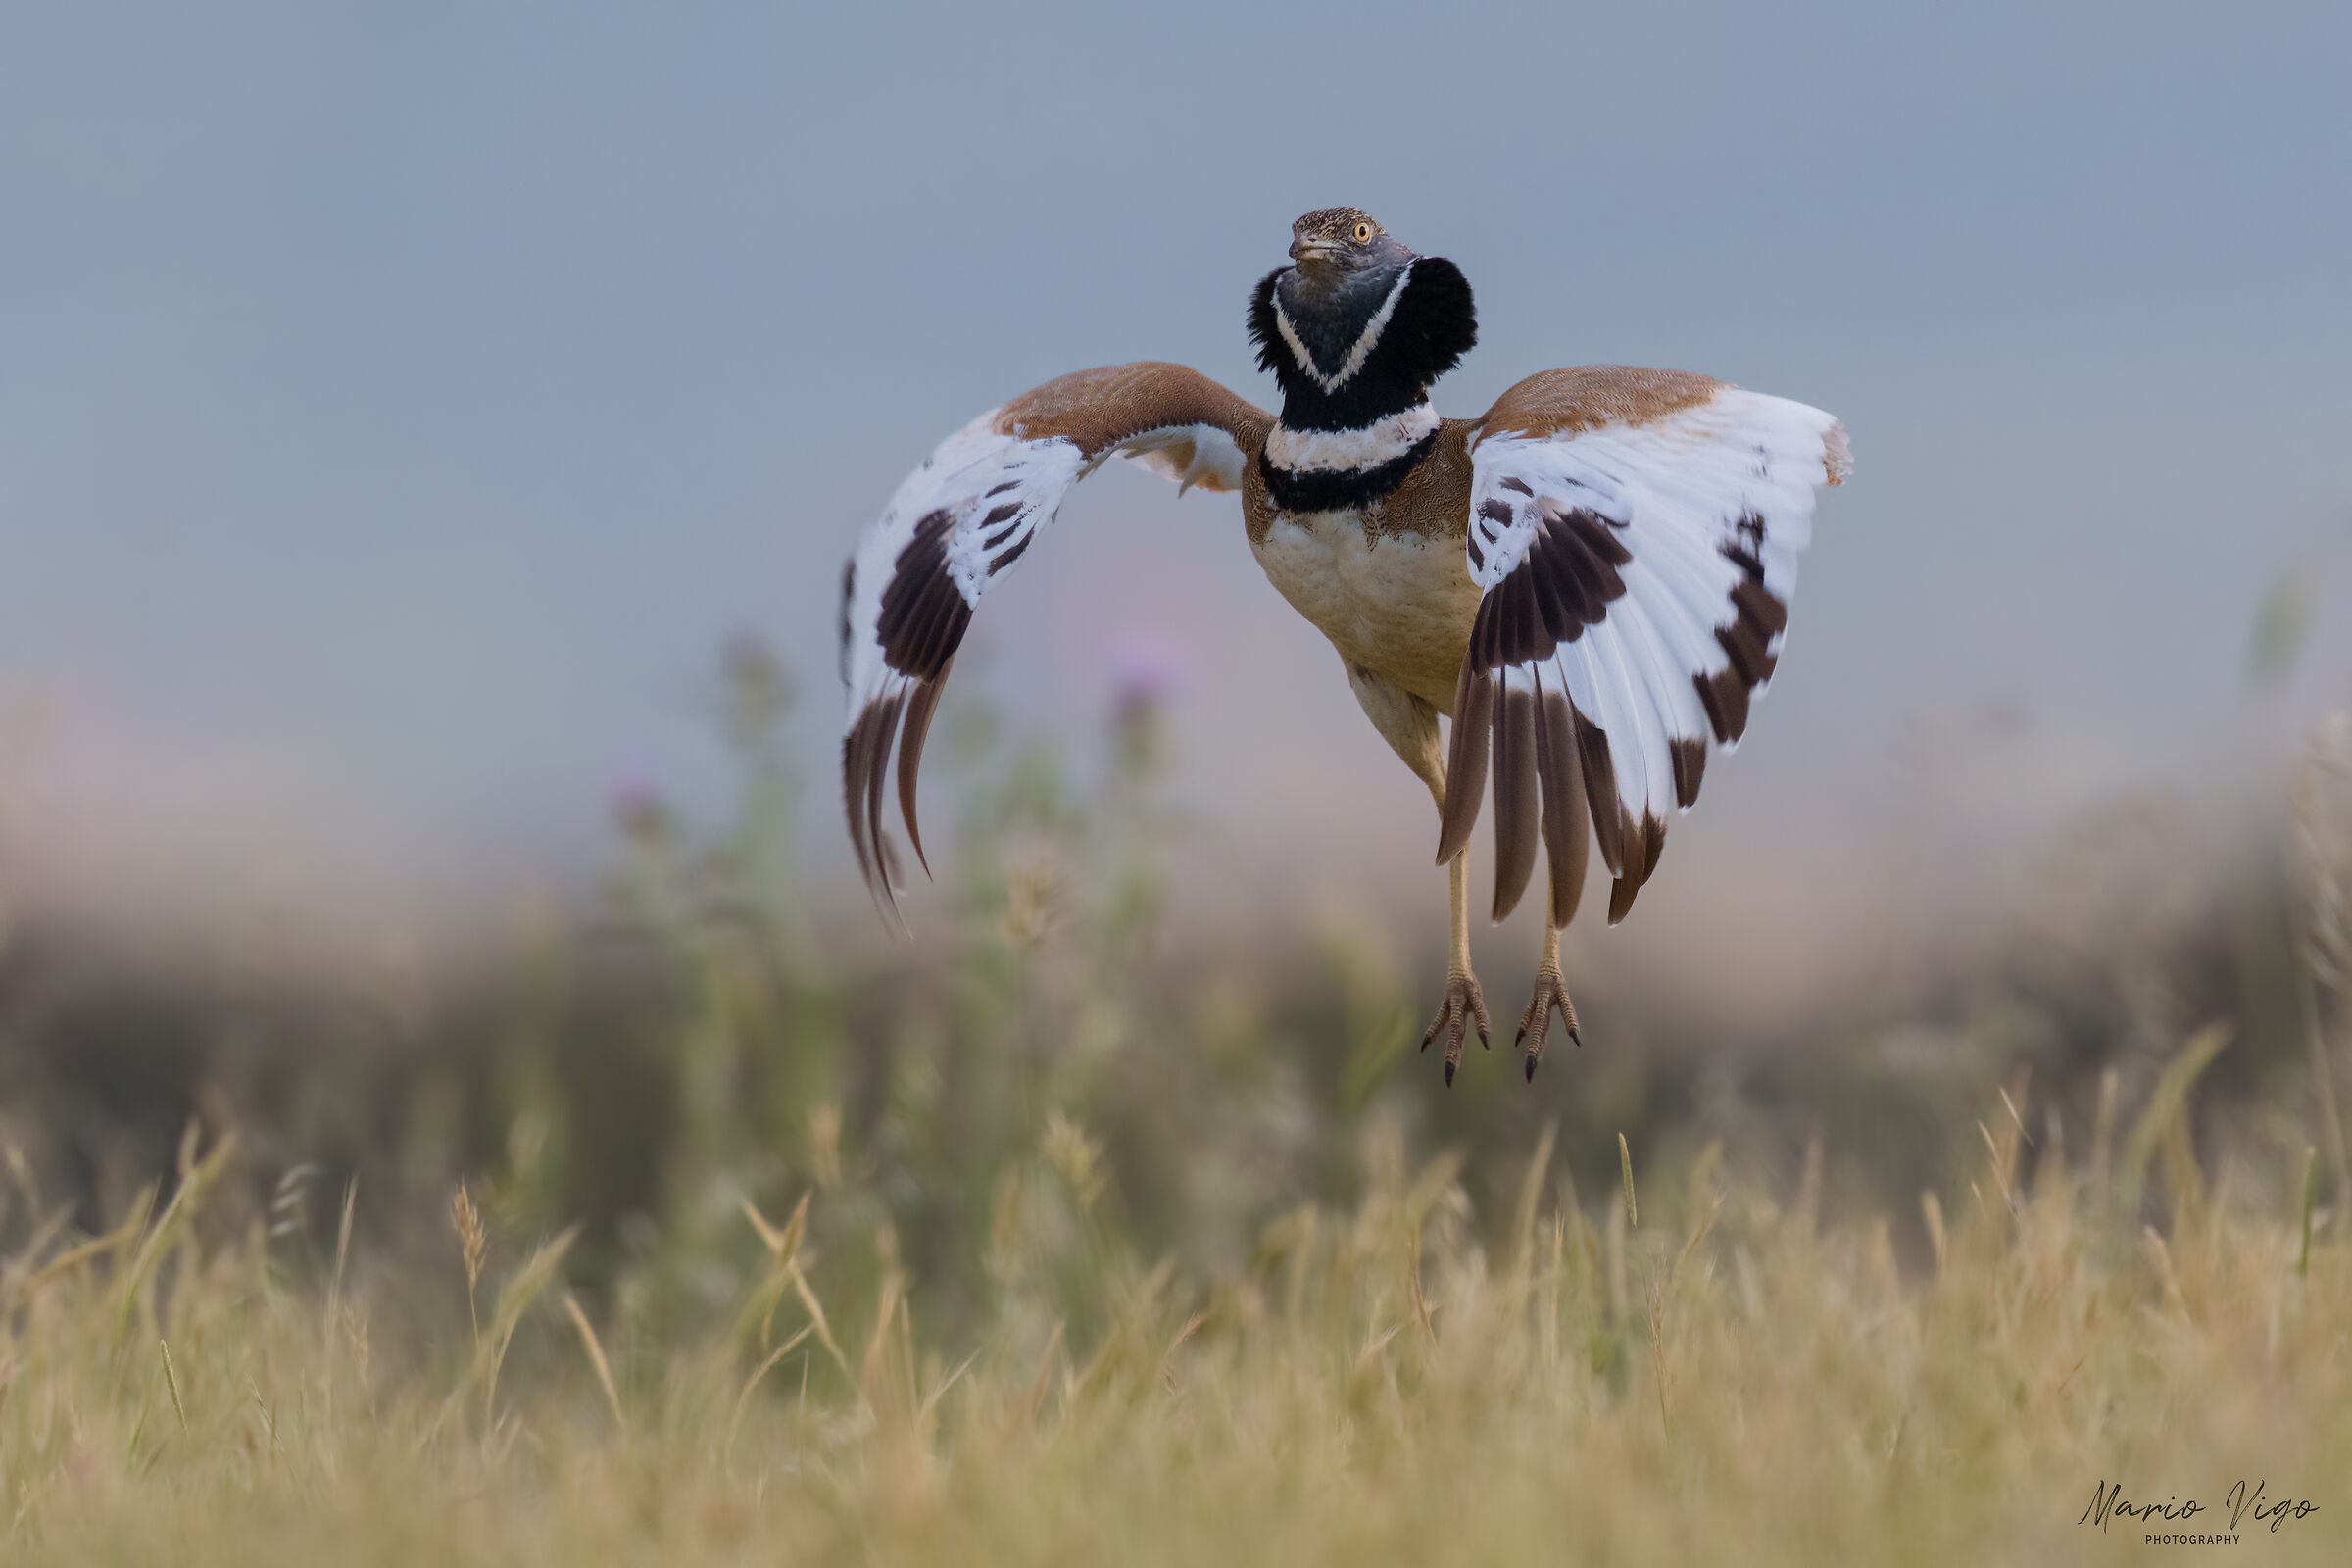 The jump of the Bustard...